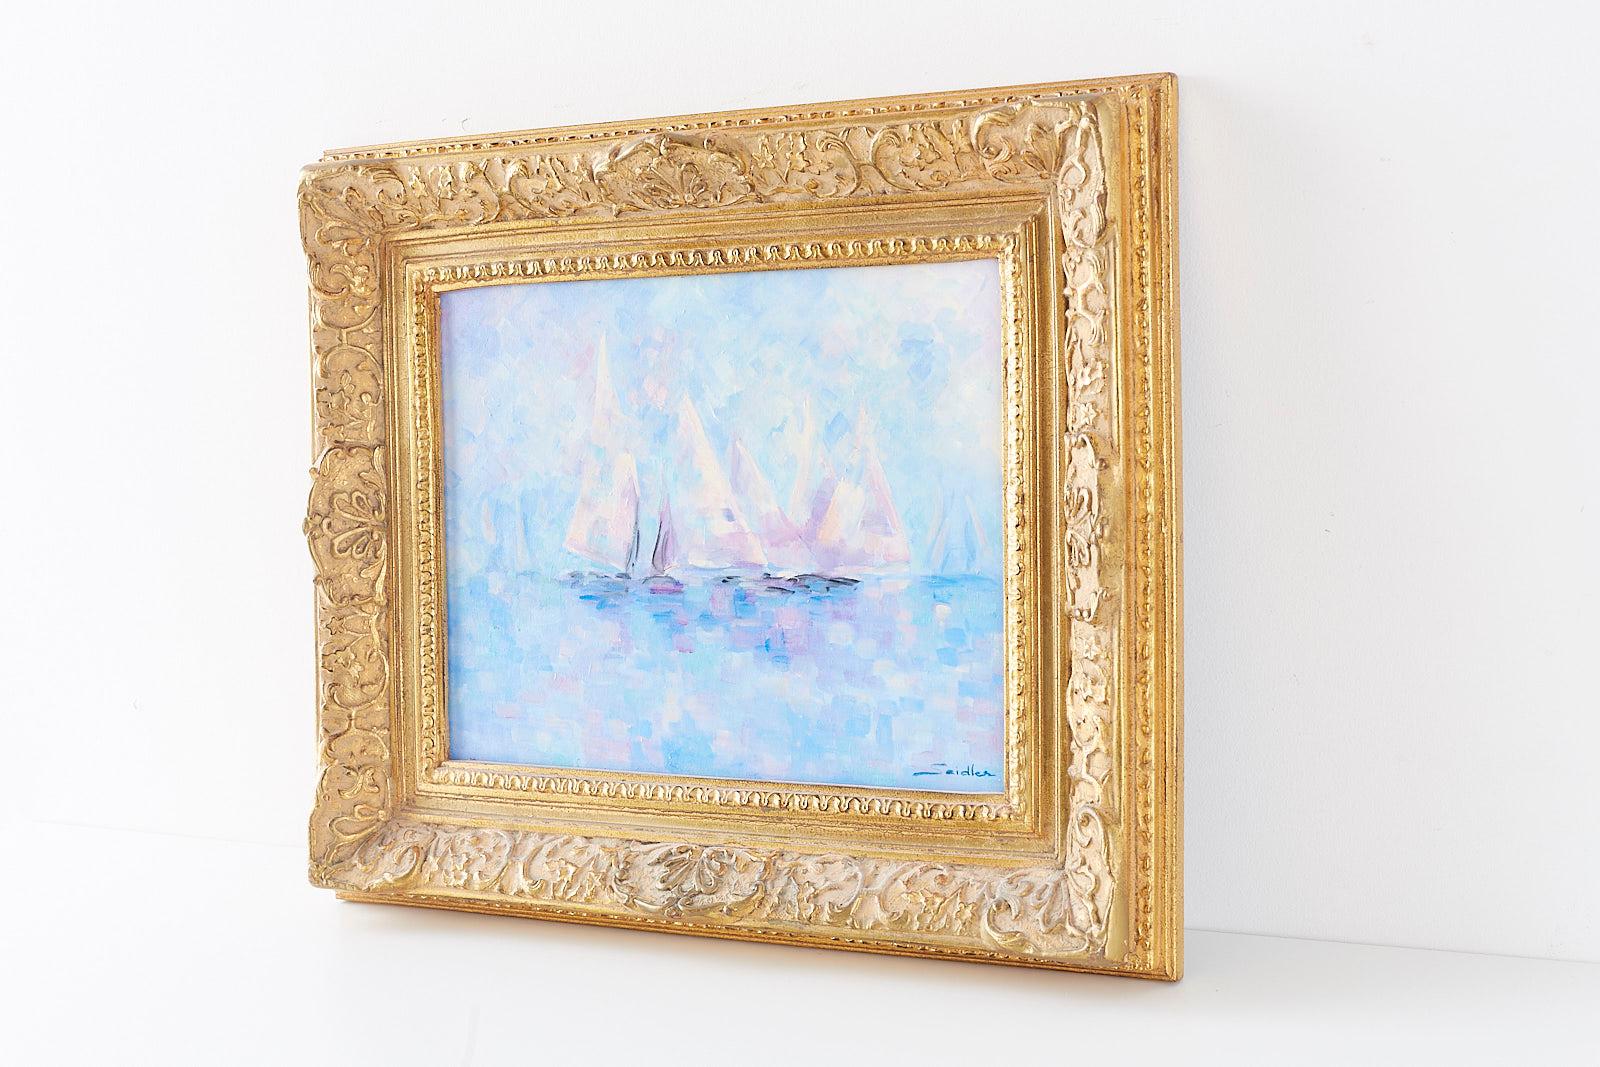 Delightful Mid-Century Modern painting of sailboats set in a thick giltwood frame. Oil on canvas in lovely pastel colors. Art measures 17.5 inches wide by 13.5 inches high. Painting is signed 